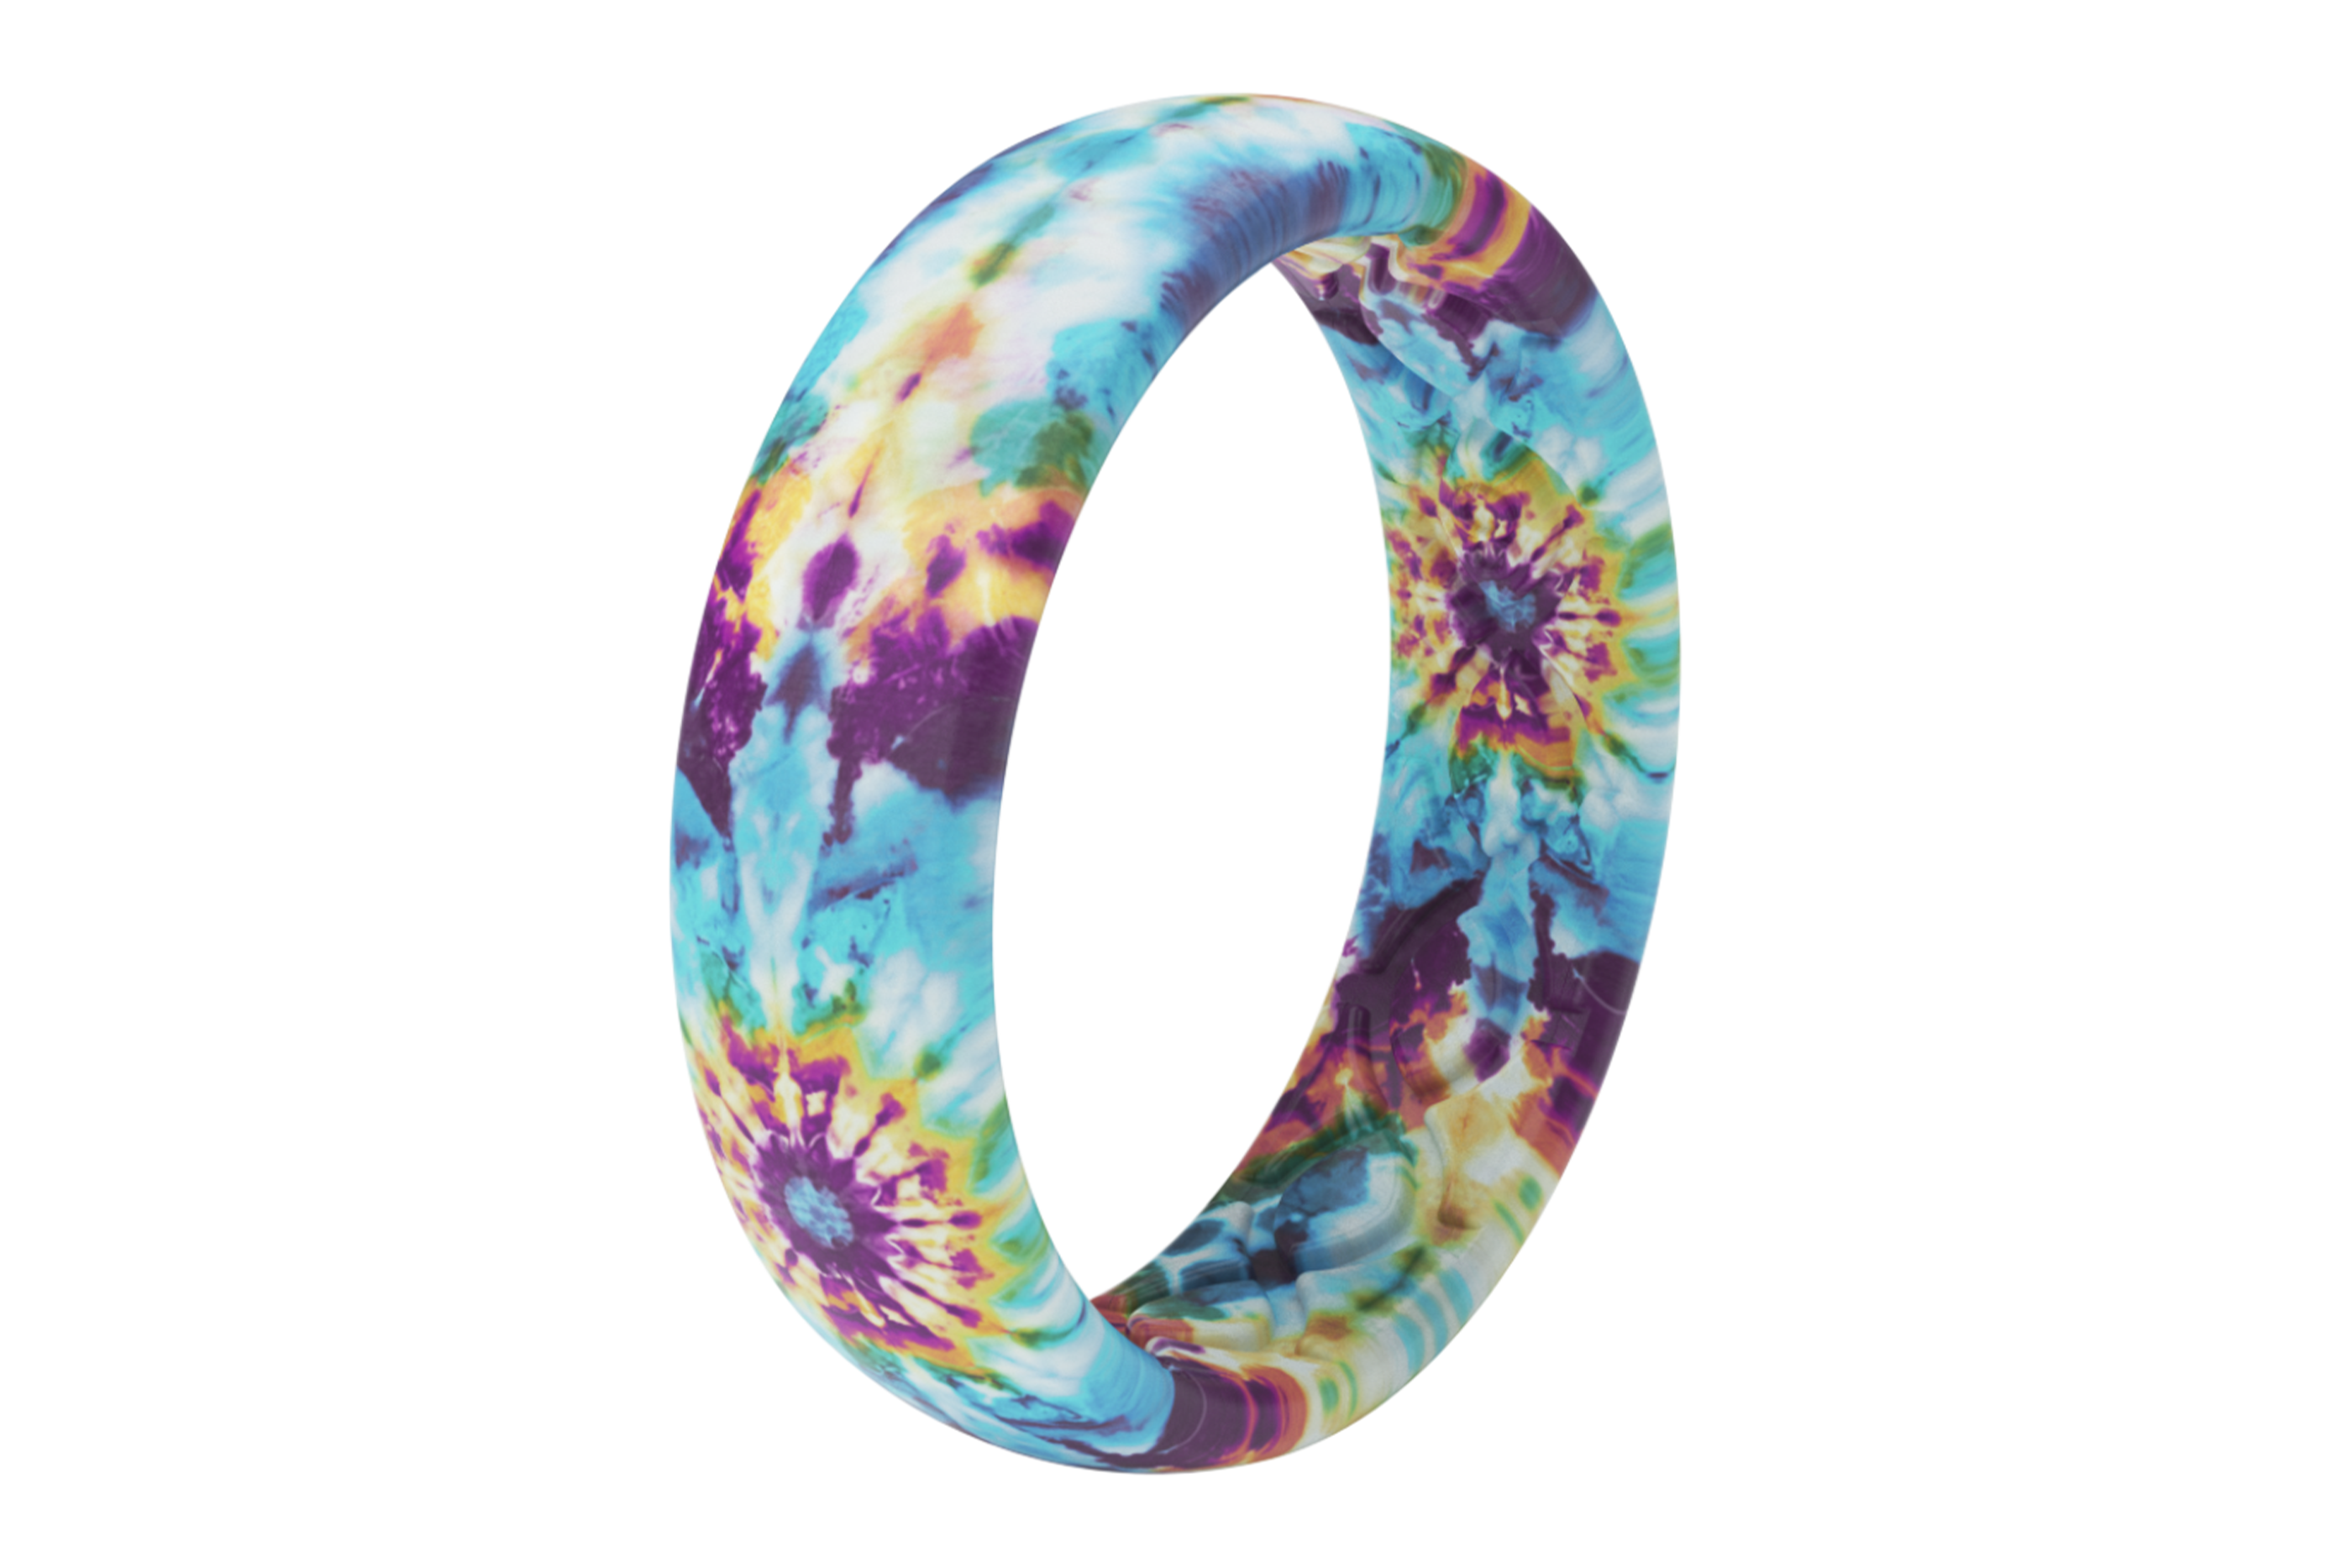 Groove Life Wild Thing Thin Tie-Dye viewed on its side